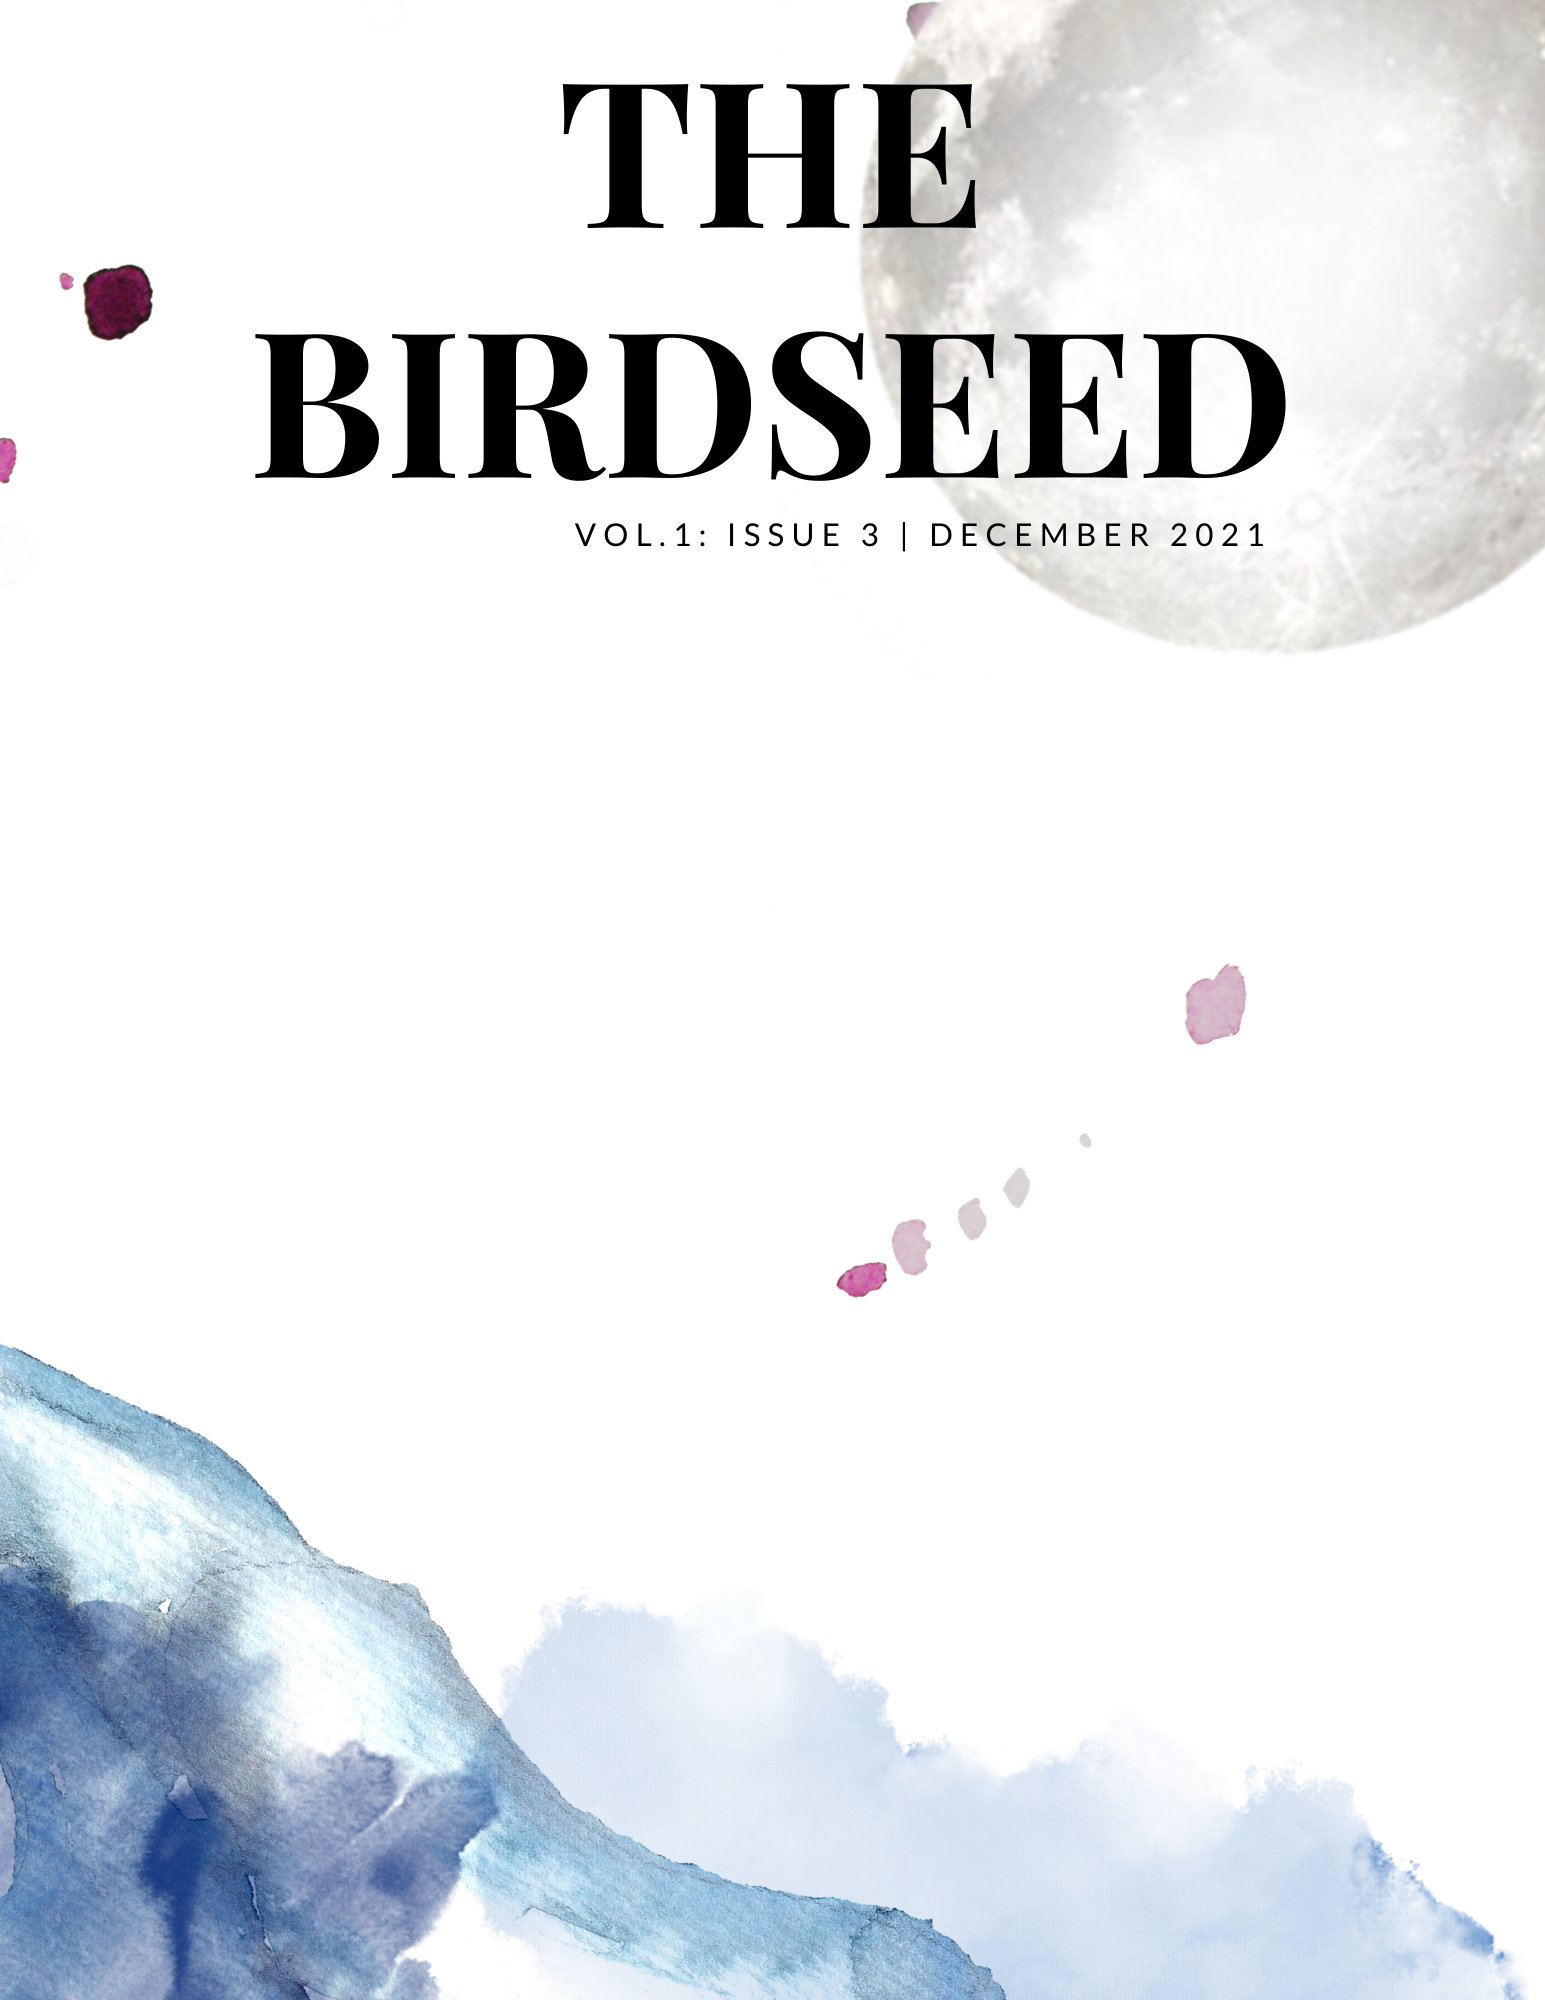 A sparse cover with watercoloured patches. "The Birdseed: Vol 1: Issue 3 | December 2021."